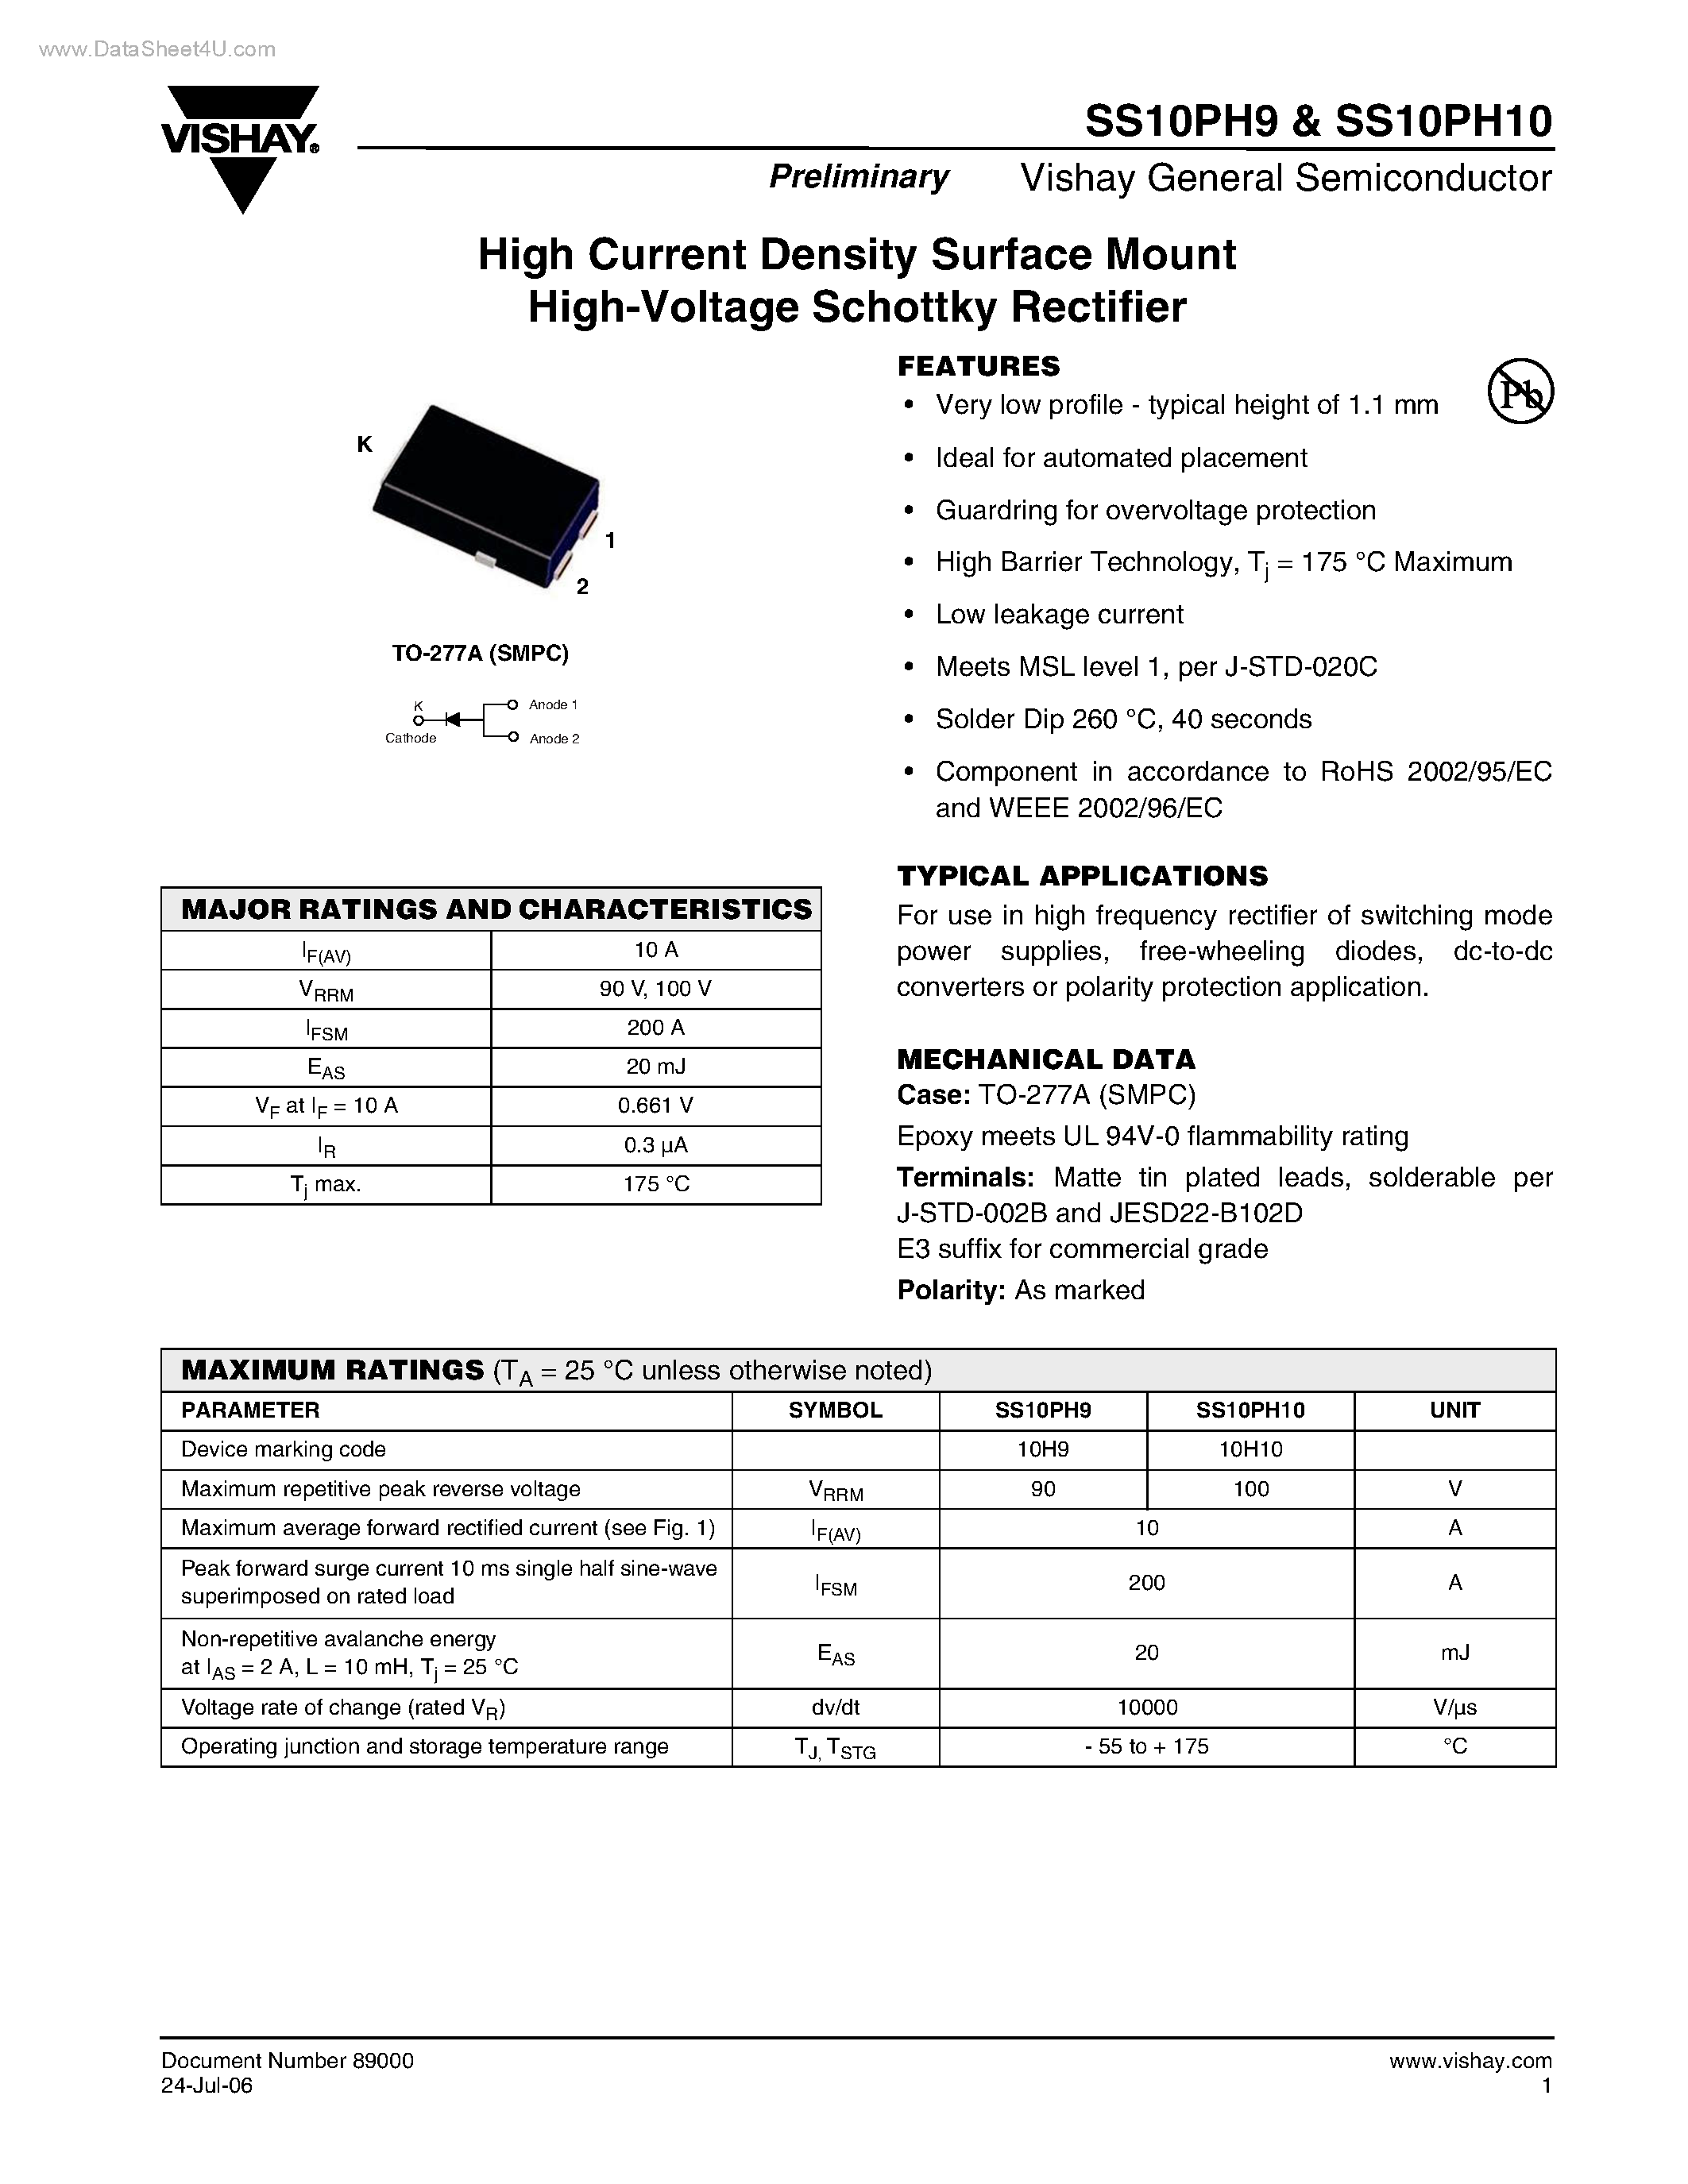 Даташит SS10PH10 - (SS10PH9 / SS10PH10) High Current Density Surface Mount High-Voltage Schottky Rectifier страница 1